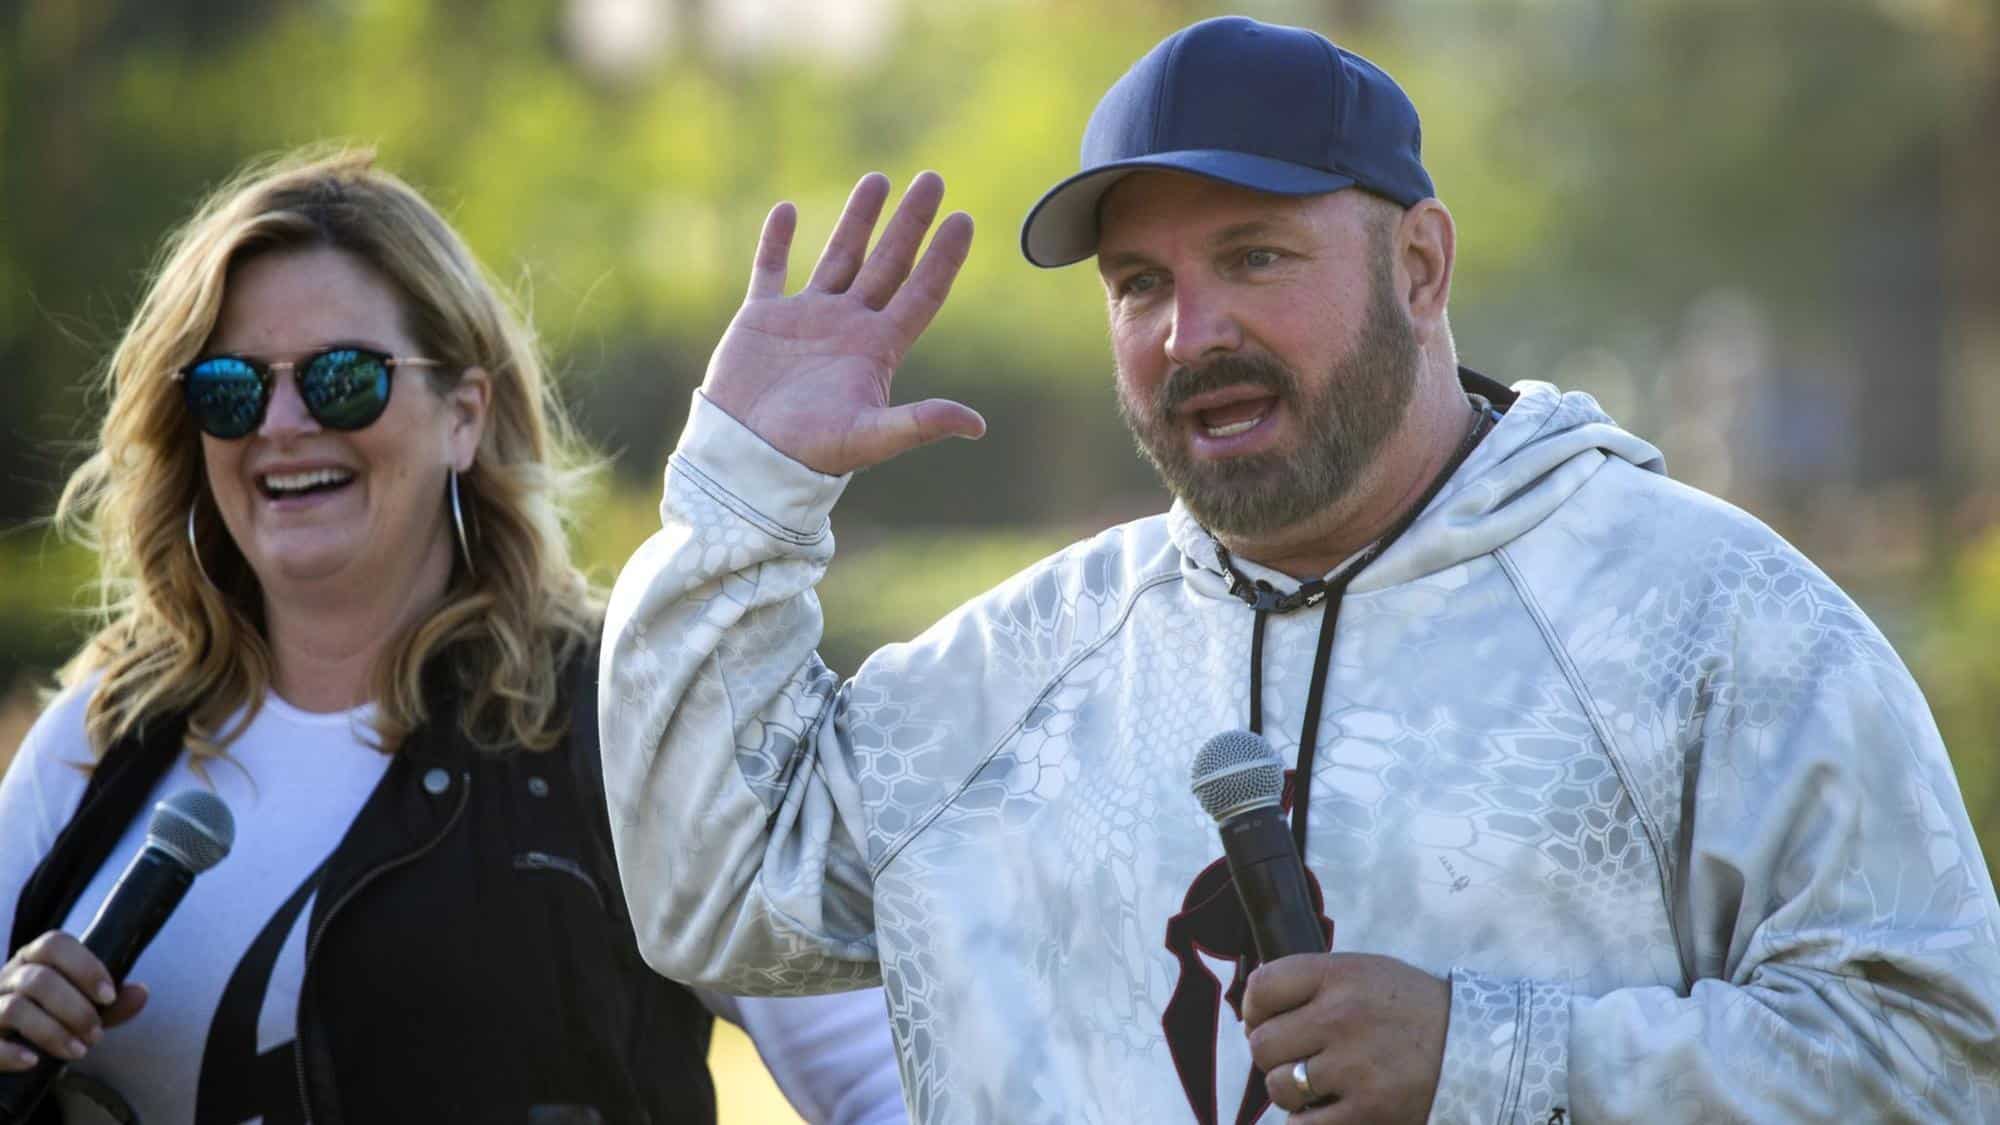 The TRUTH About Garth Brooks and Trisha Yearwood’s Marriage